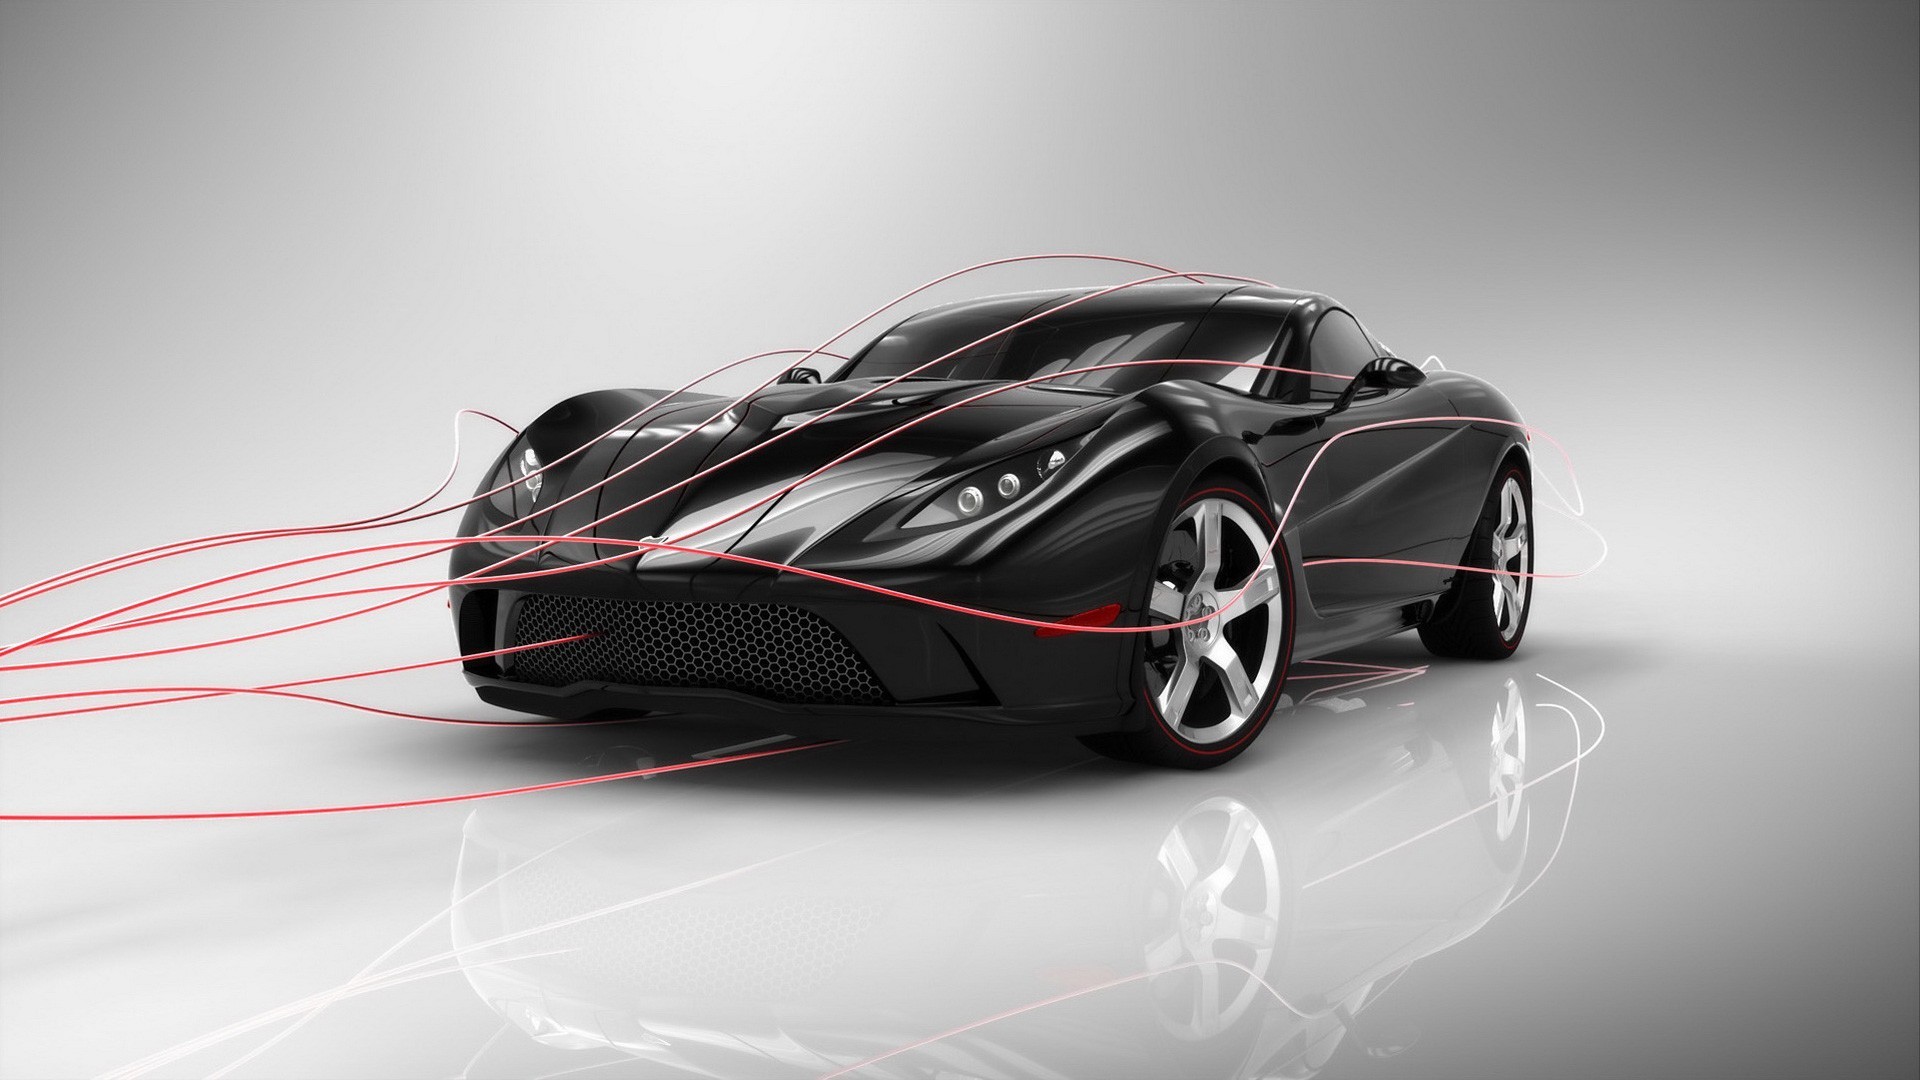 General 1920x1080 car black cars supercars vehicle reflection simple background gradient